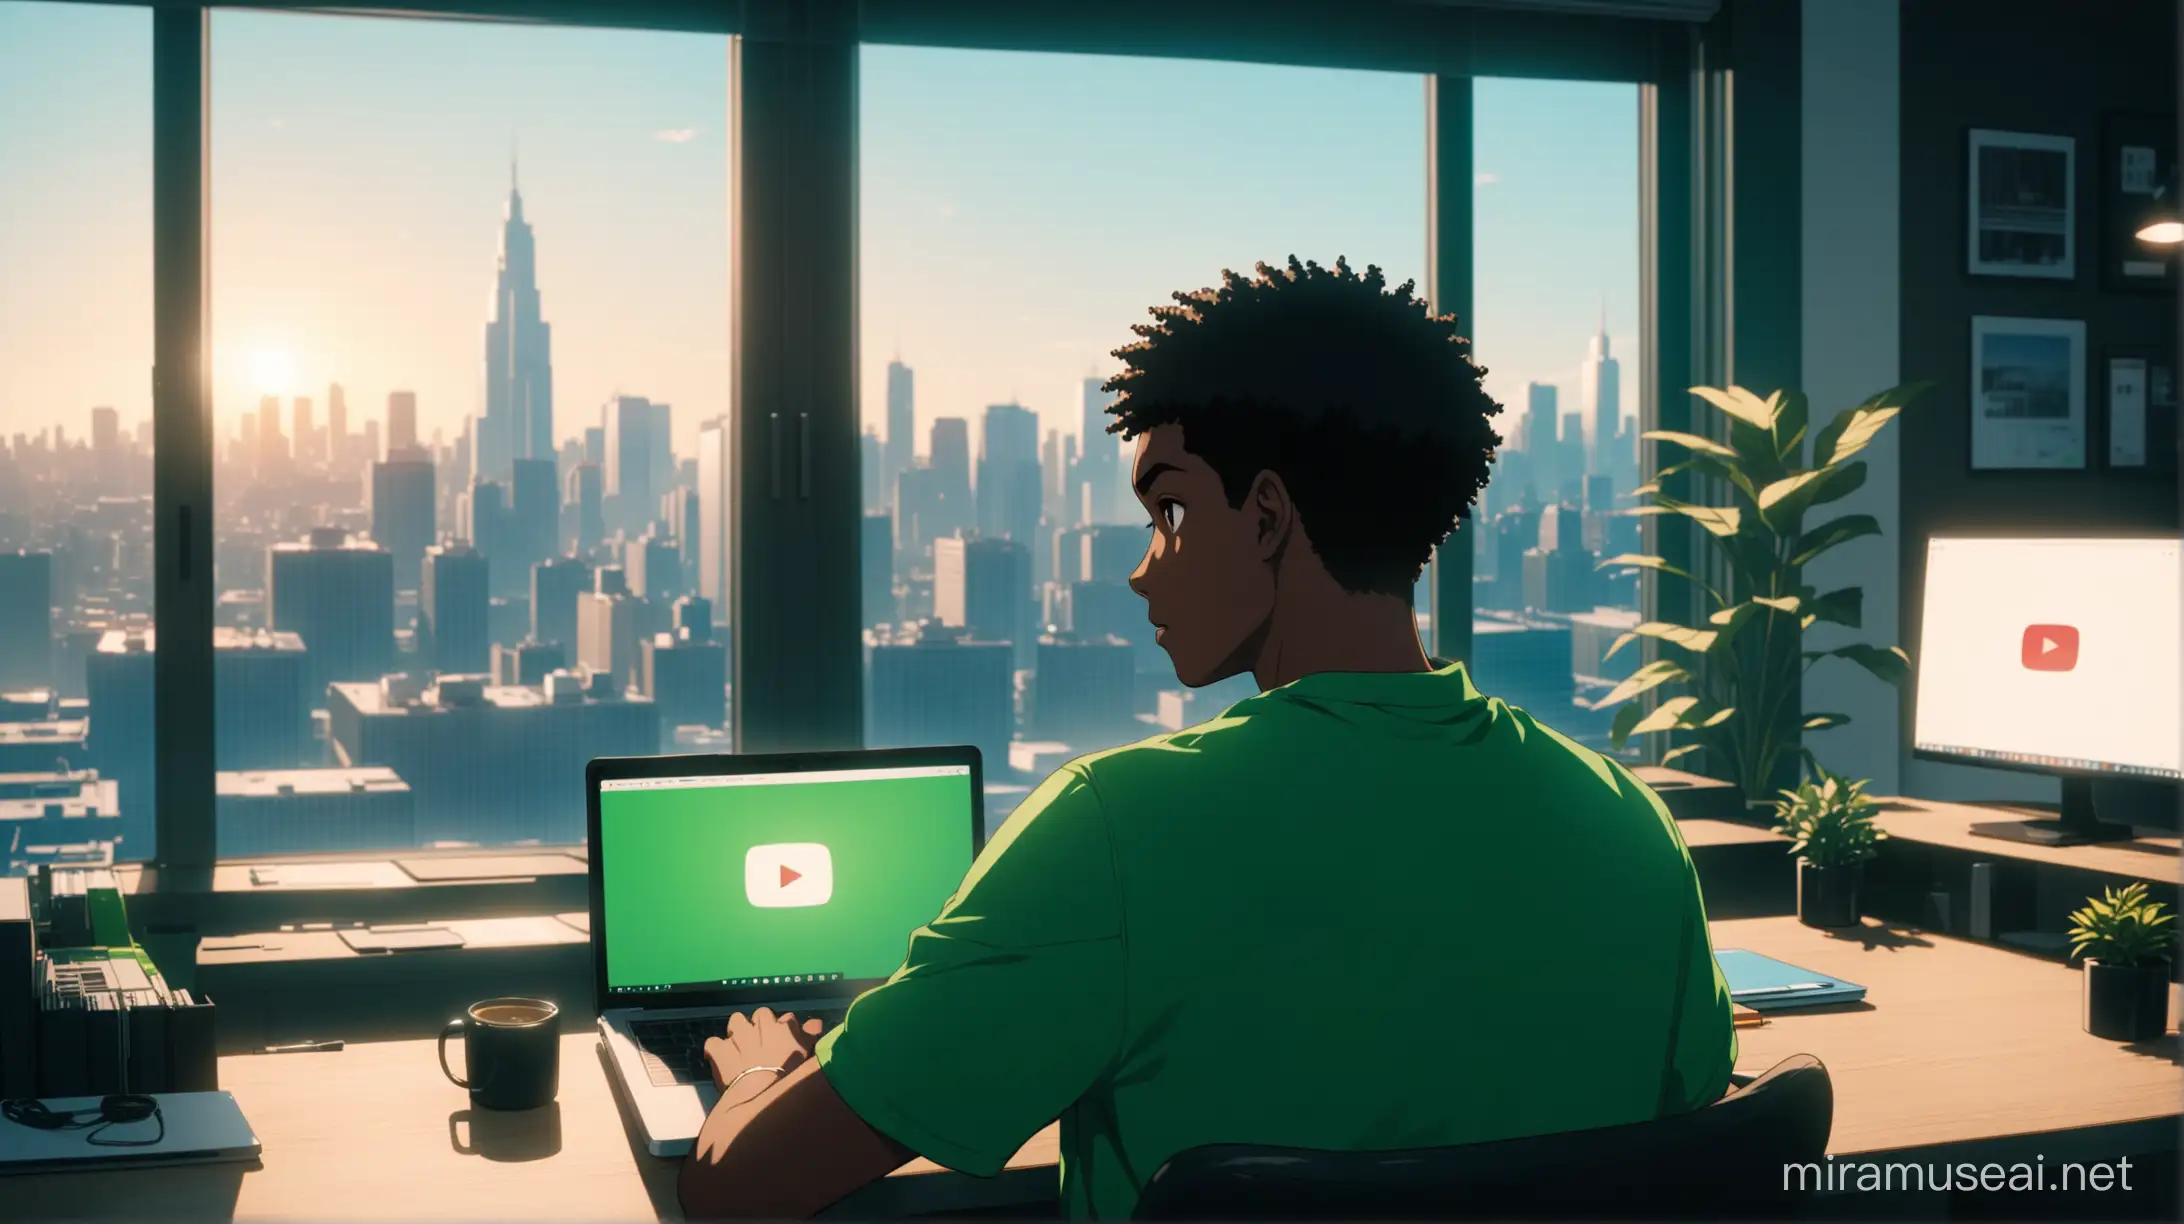 Young Black Man Working at Desk with City View in Green Aesthetic